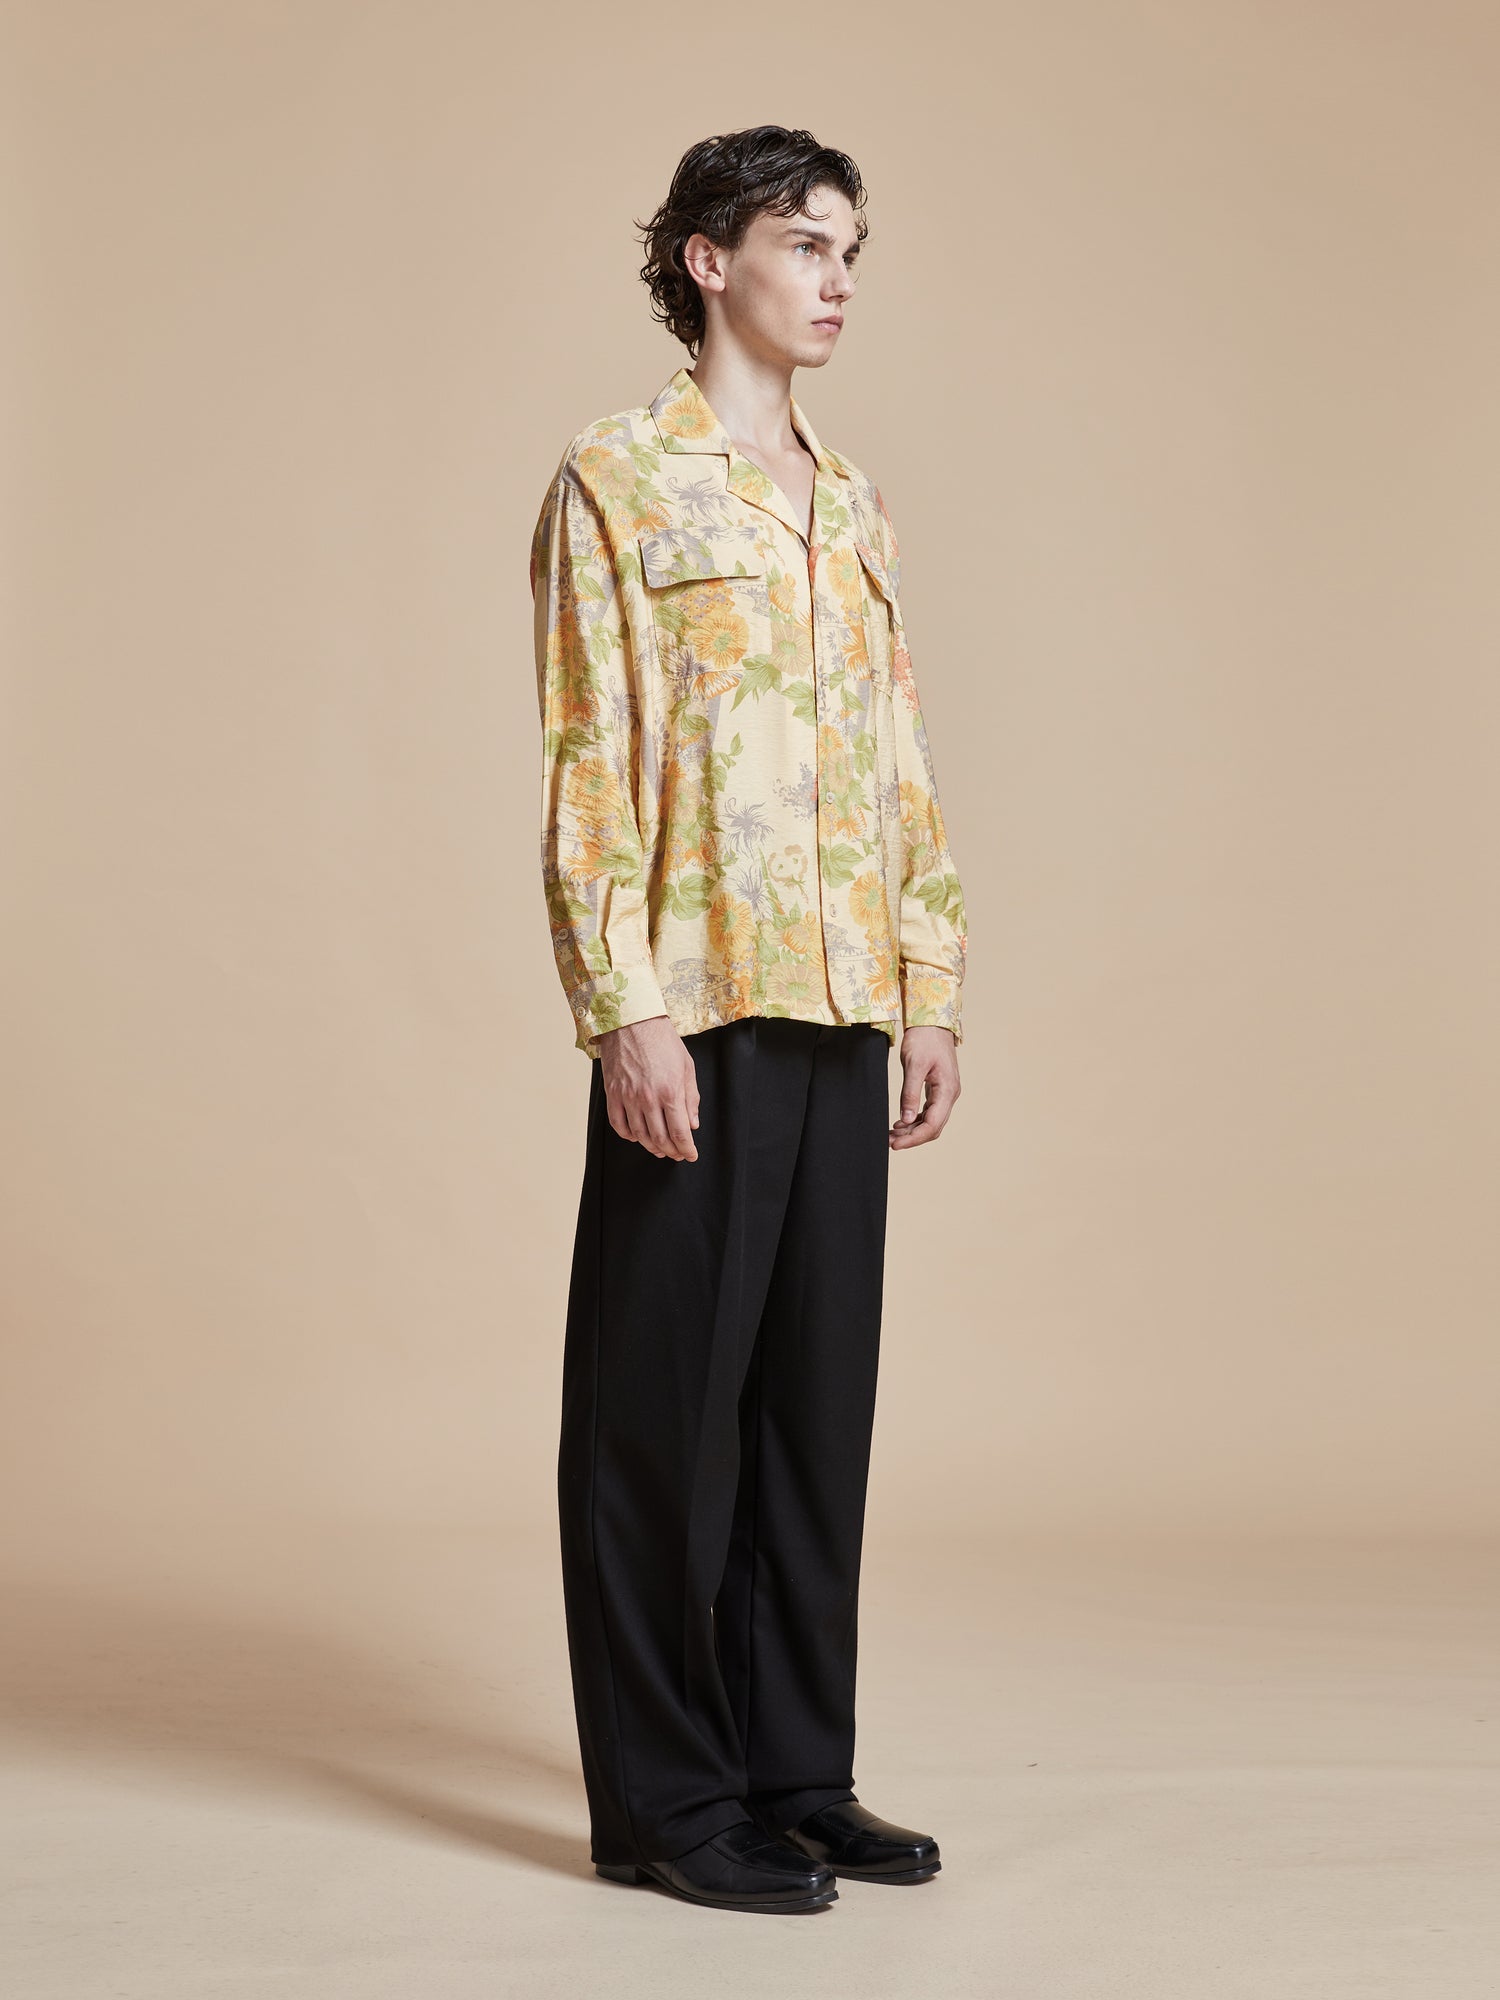 A model wearing a yellow floral shirt with nature-inspired Phulkari motifs, the Meraj Vase Pot Long Sleeve Camp Shirt from Found, and black trousers.